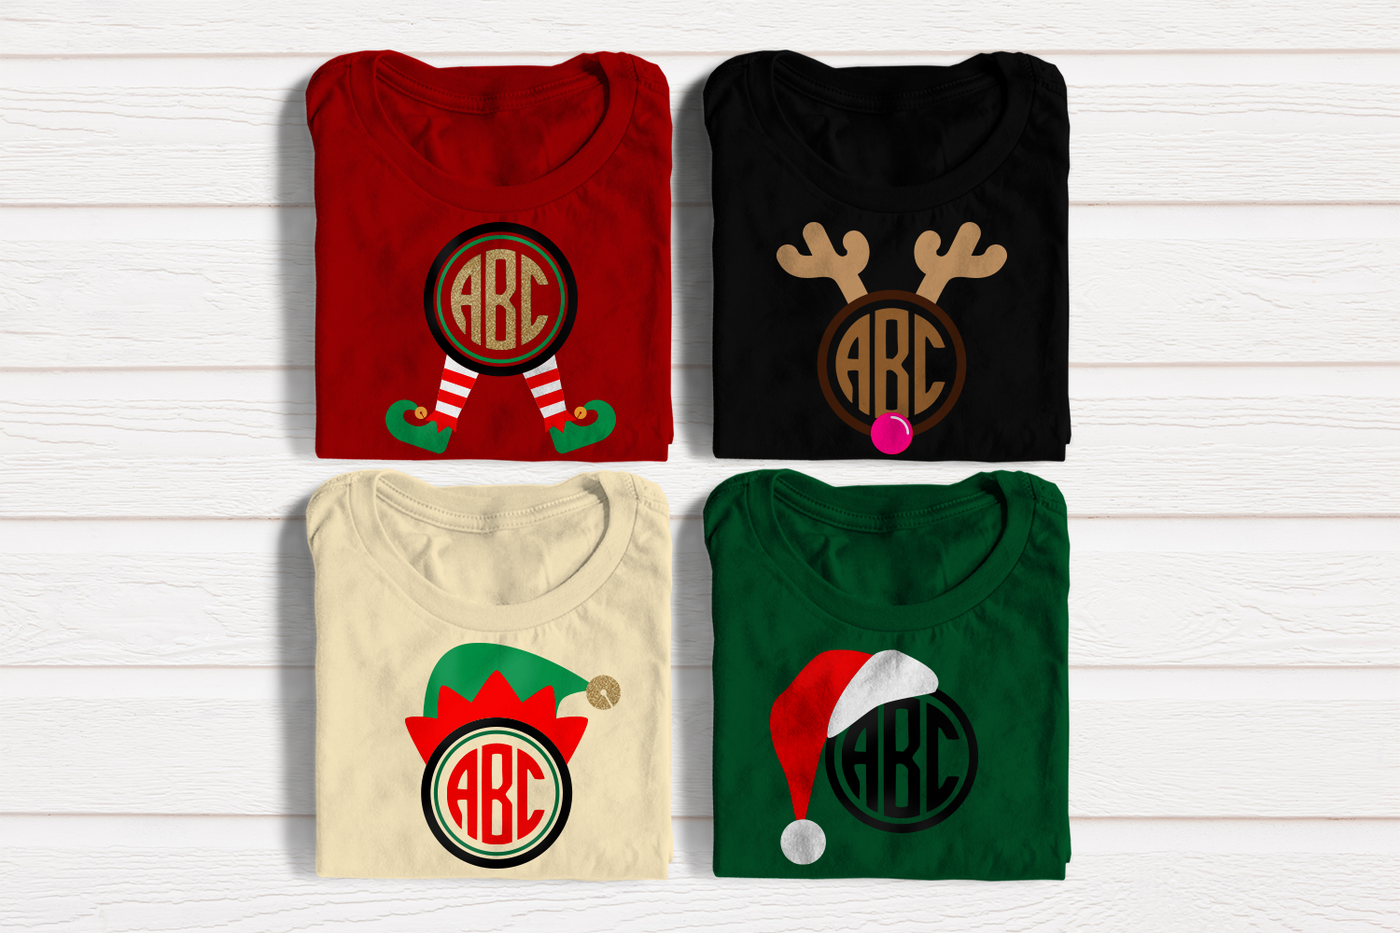 Four folded tees in Christmas colors. Each has a round monogram frame with sample monogram letters (not included). The included frame designs are elf legs, an elf hat, reindeer horns and nose, and a Santa hat.